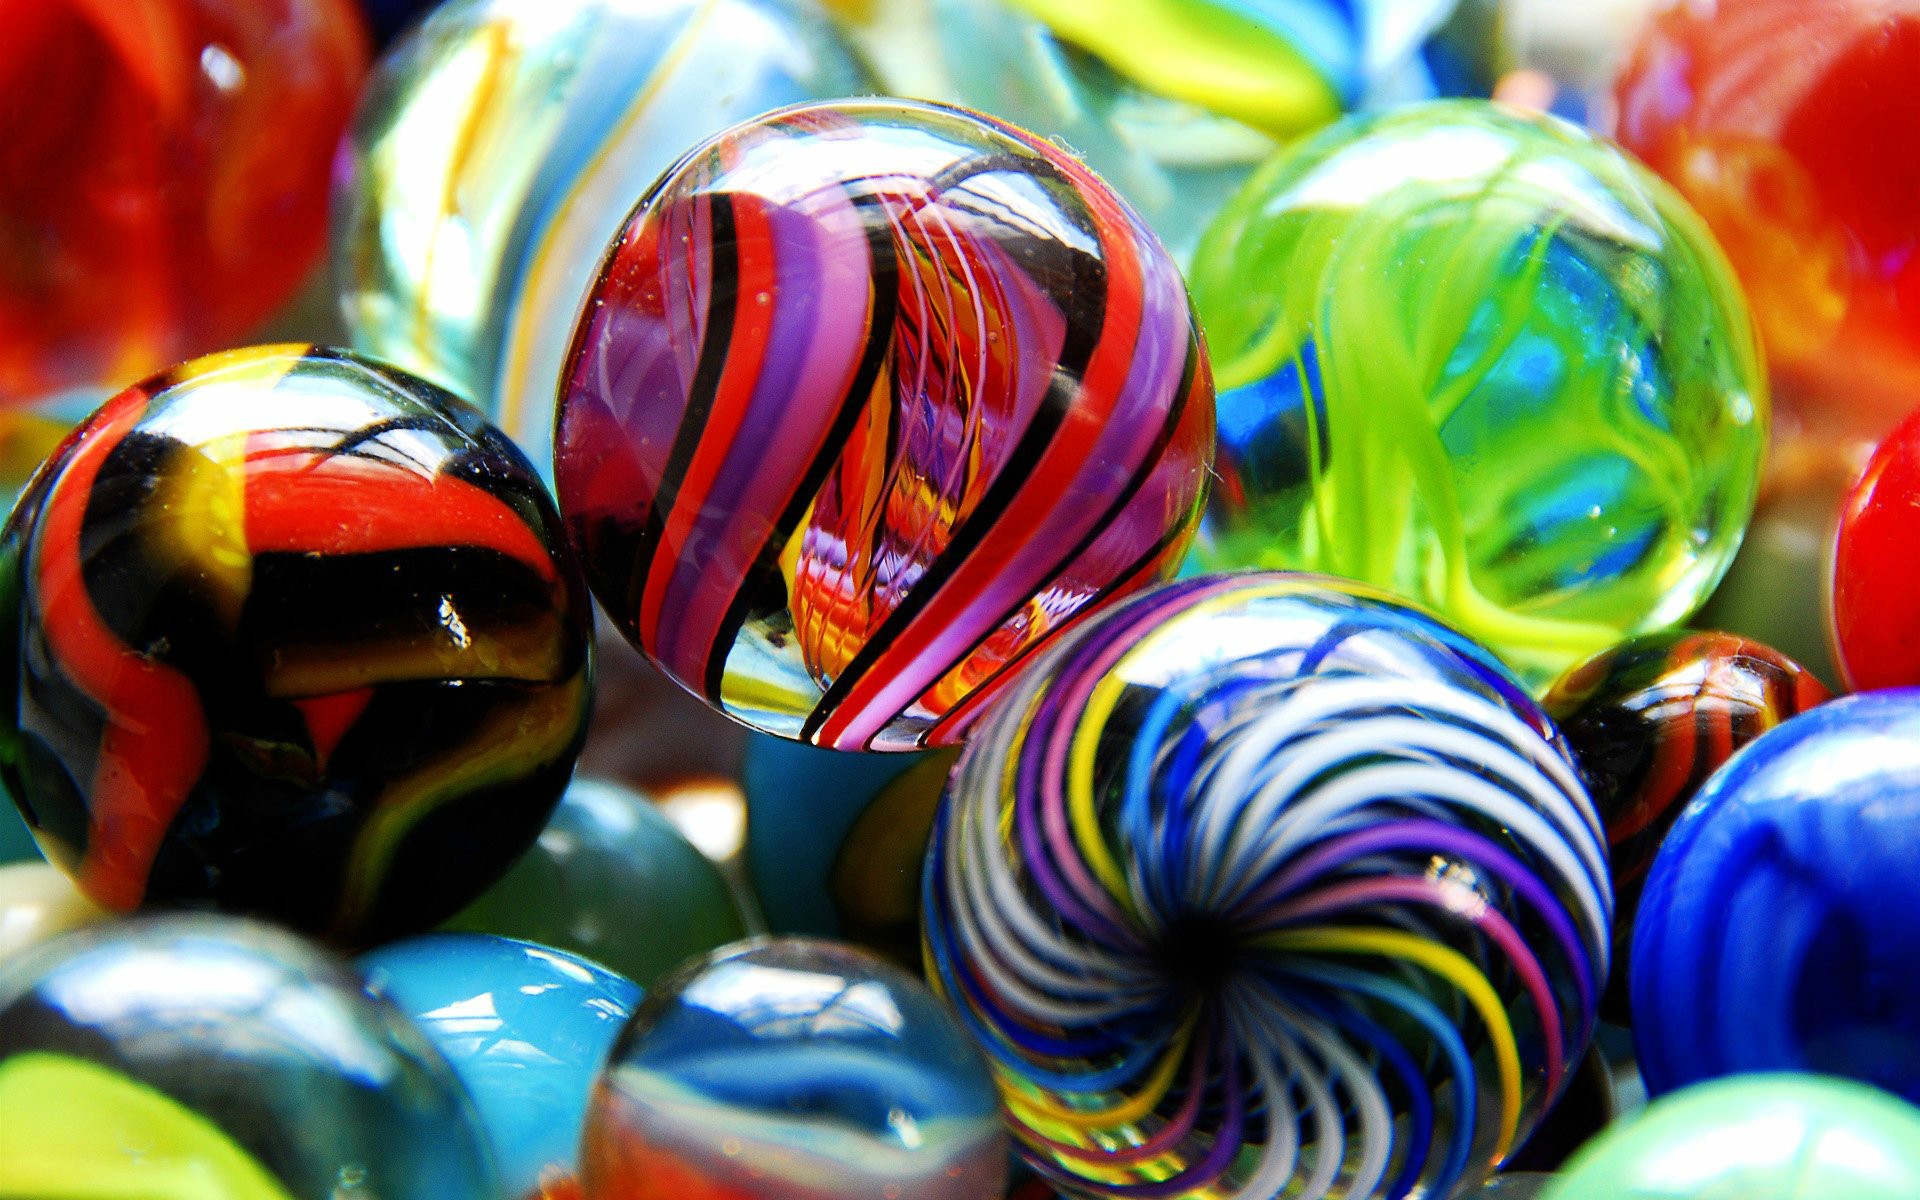 Colored Glass Marbles Glass Balls Desktop Wallpaper - Wallpapers and ...